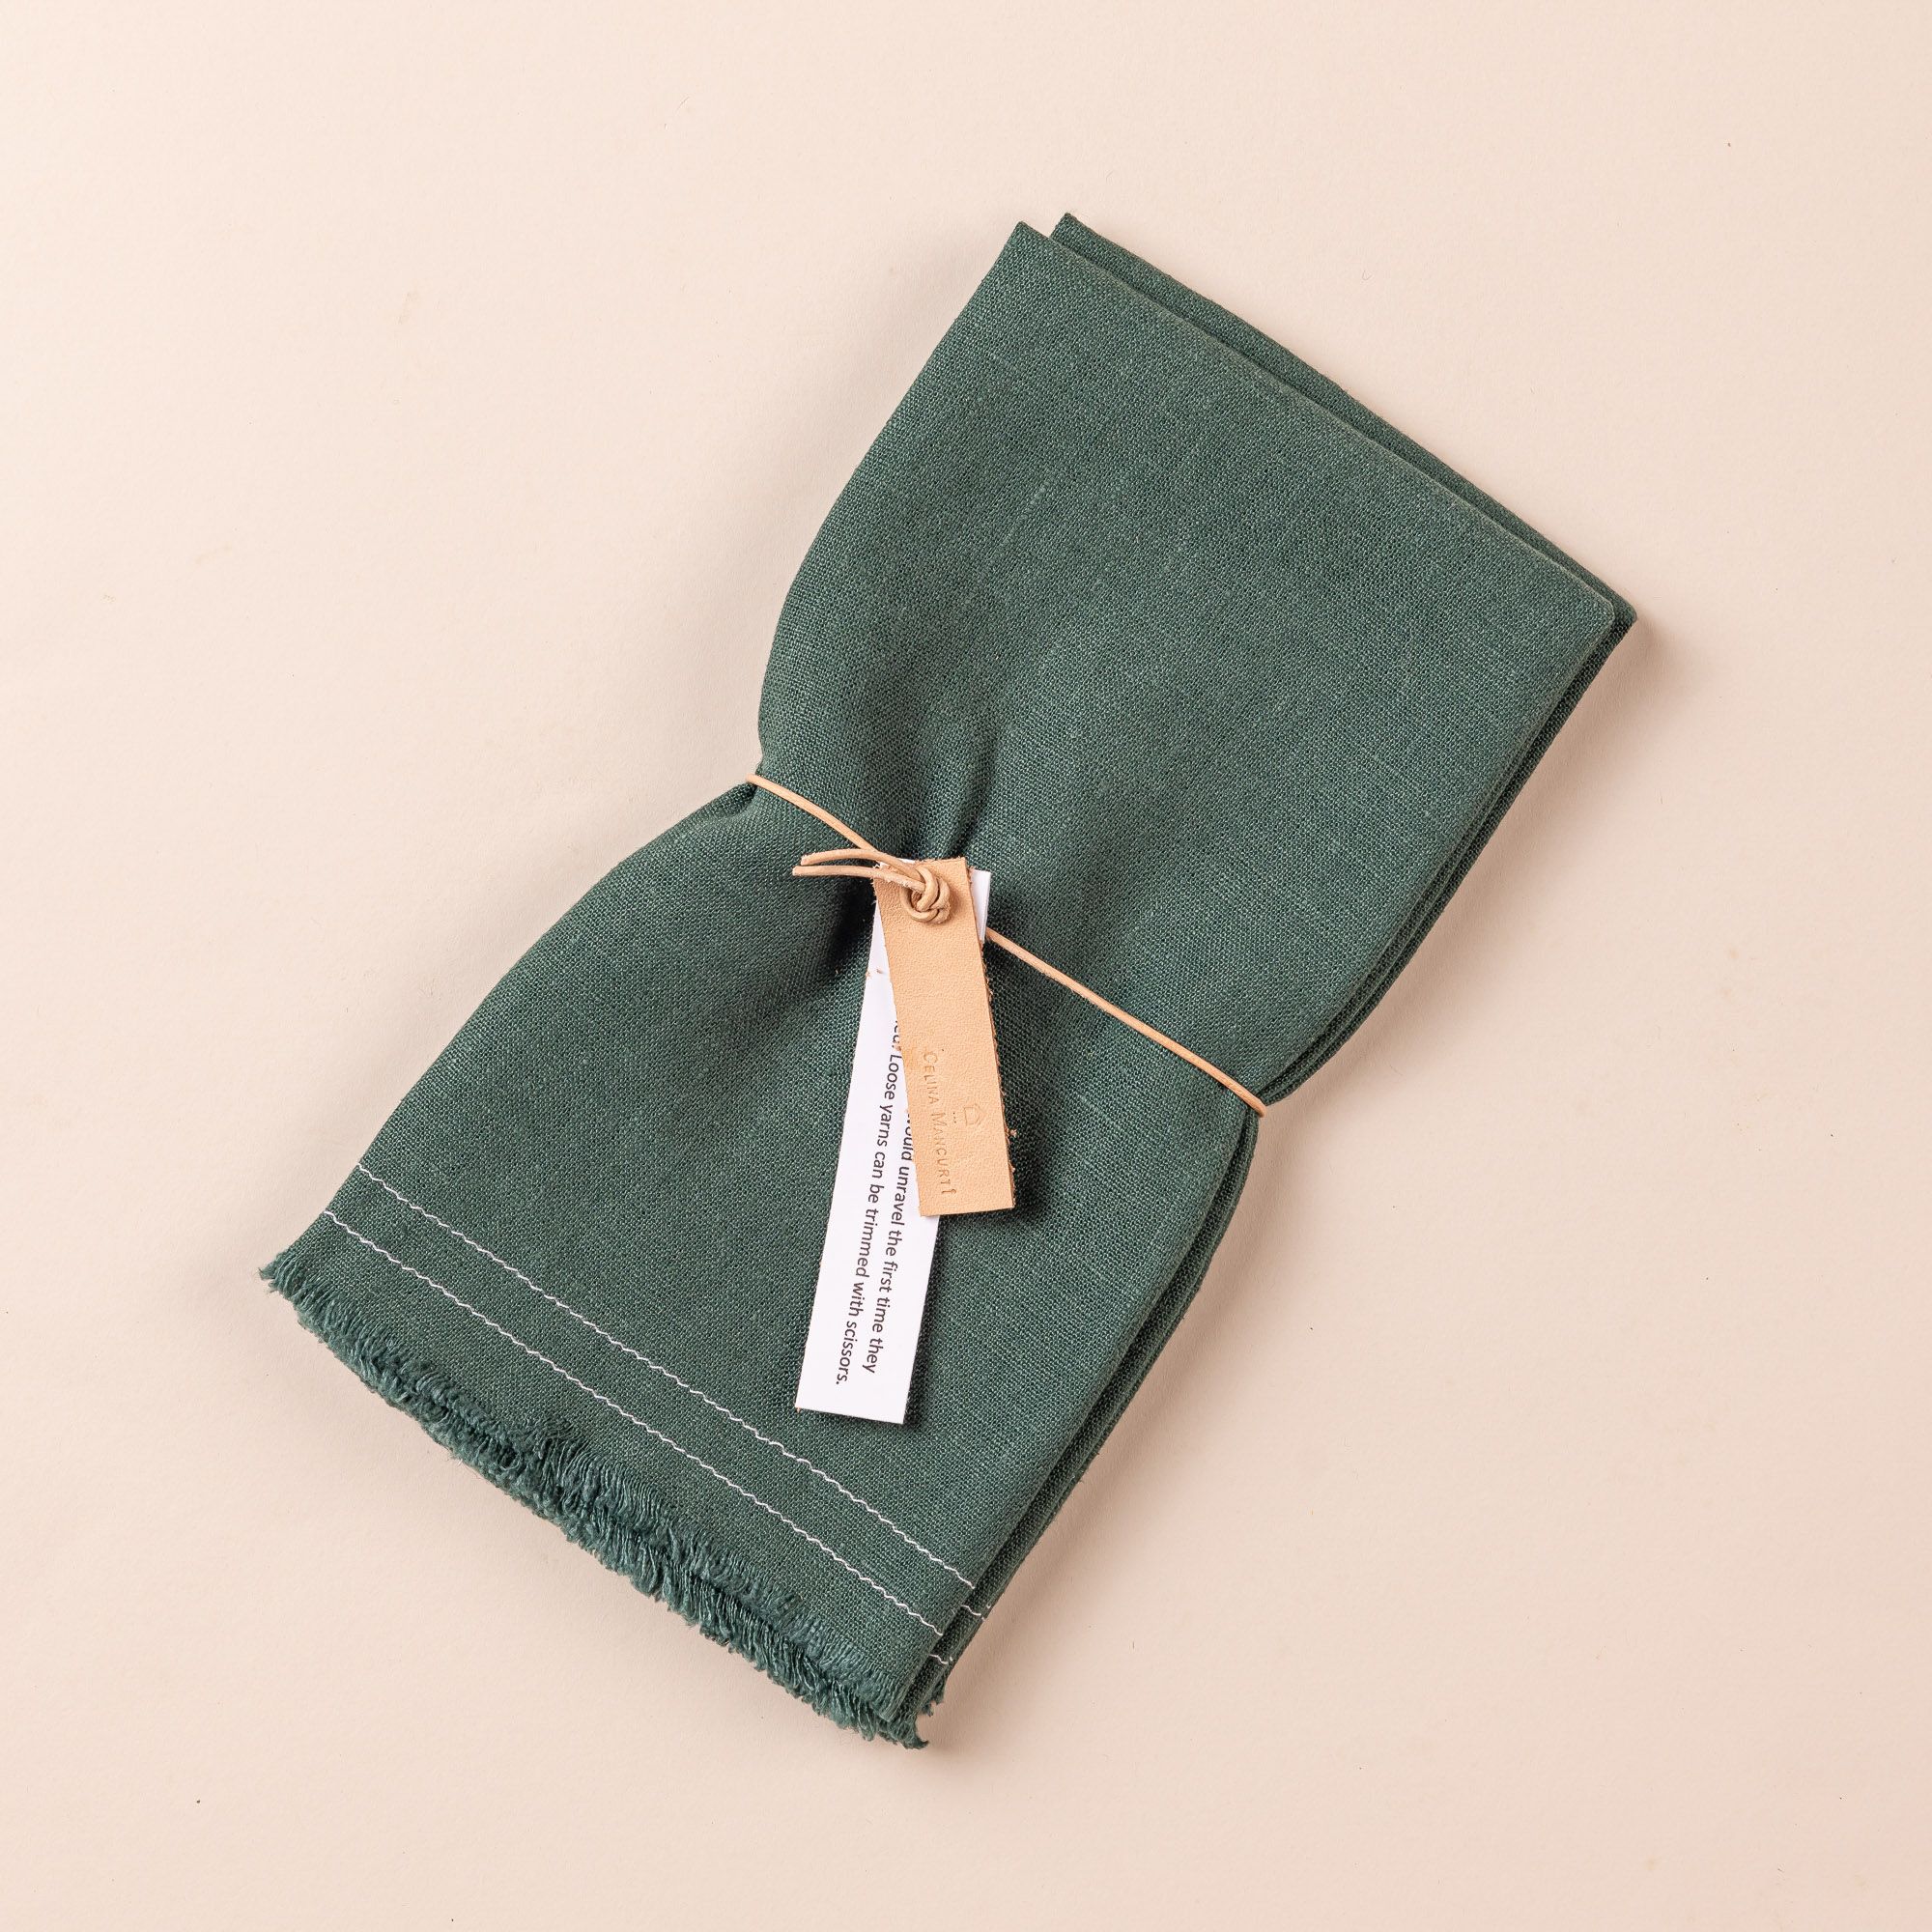 A folded deep teal pair of linen napkins with a string and small tag wrapped around the center. The bottom end of the napkins has a fringe edge.